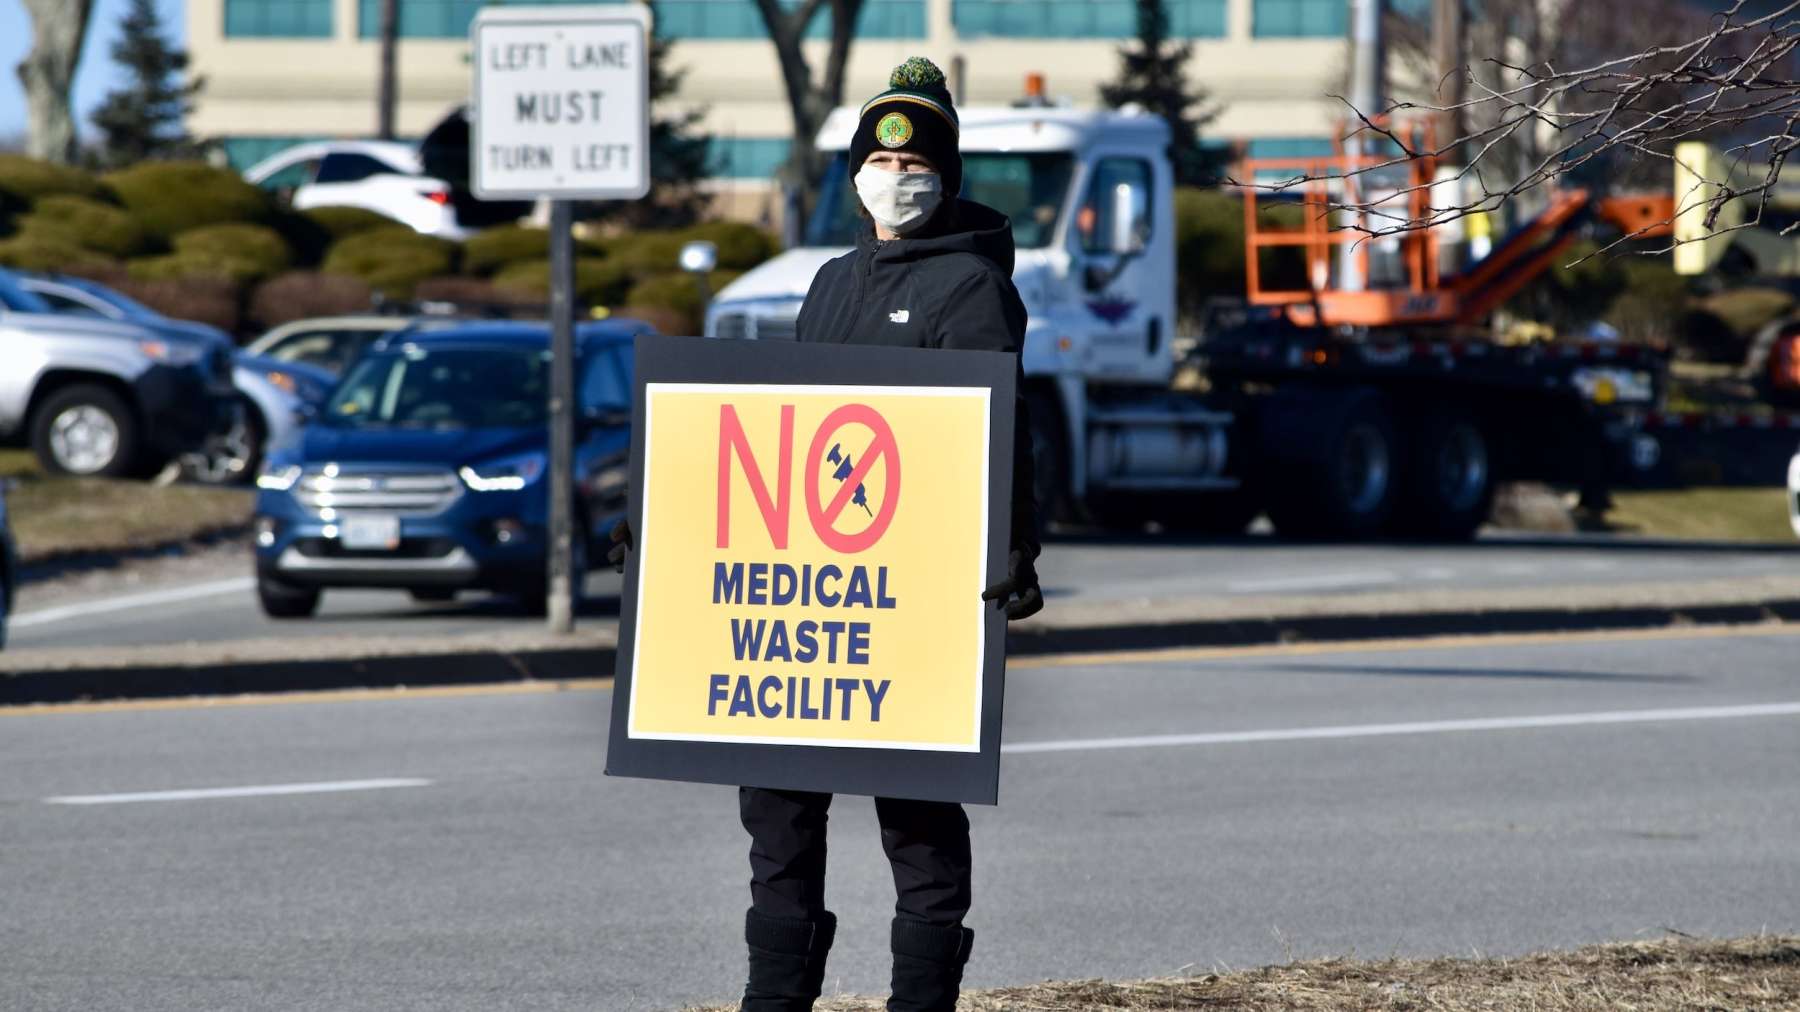 Attorney General Neronha expresses concerns over West Warwick Medrecycler pyrolysis facility